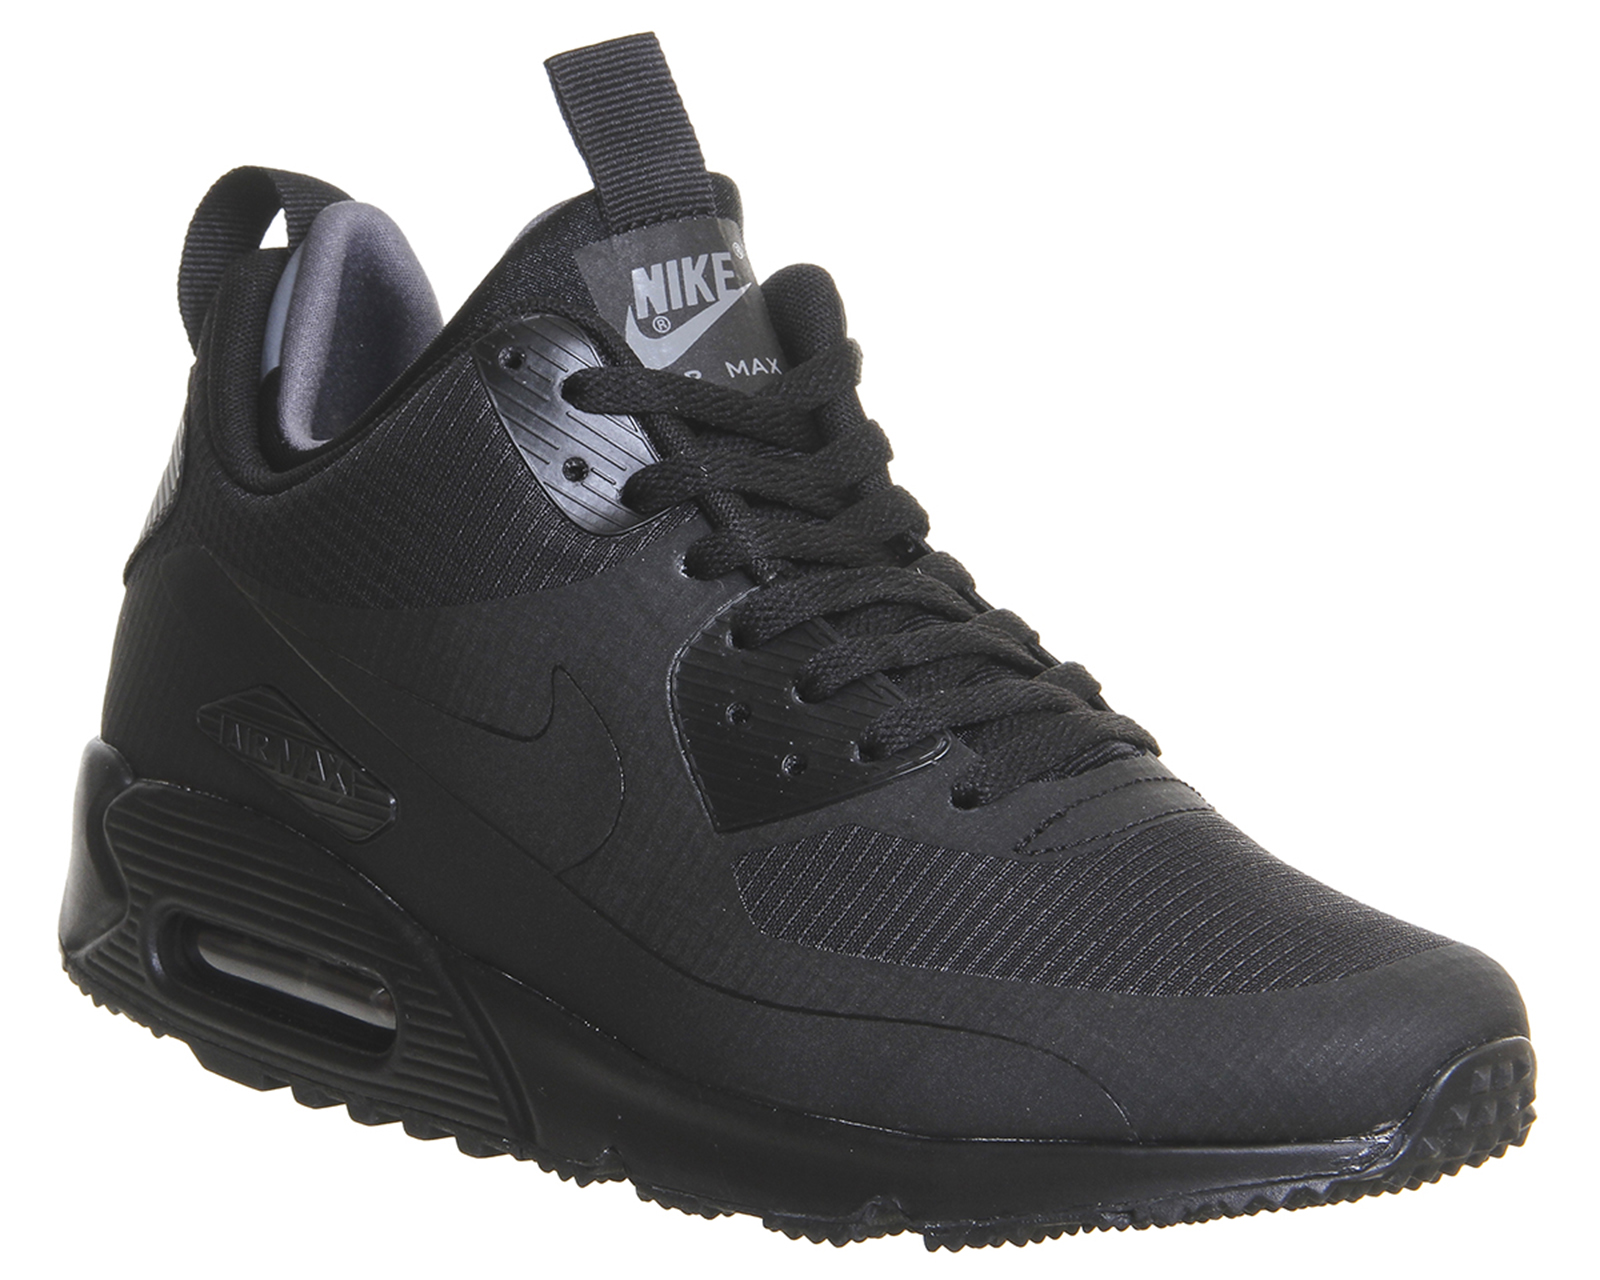 Nike Air Max 90 Mid Winter Black - His trainers